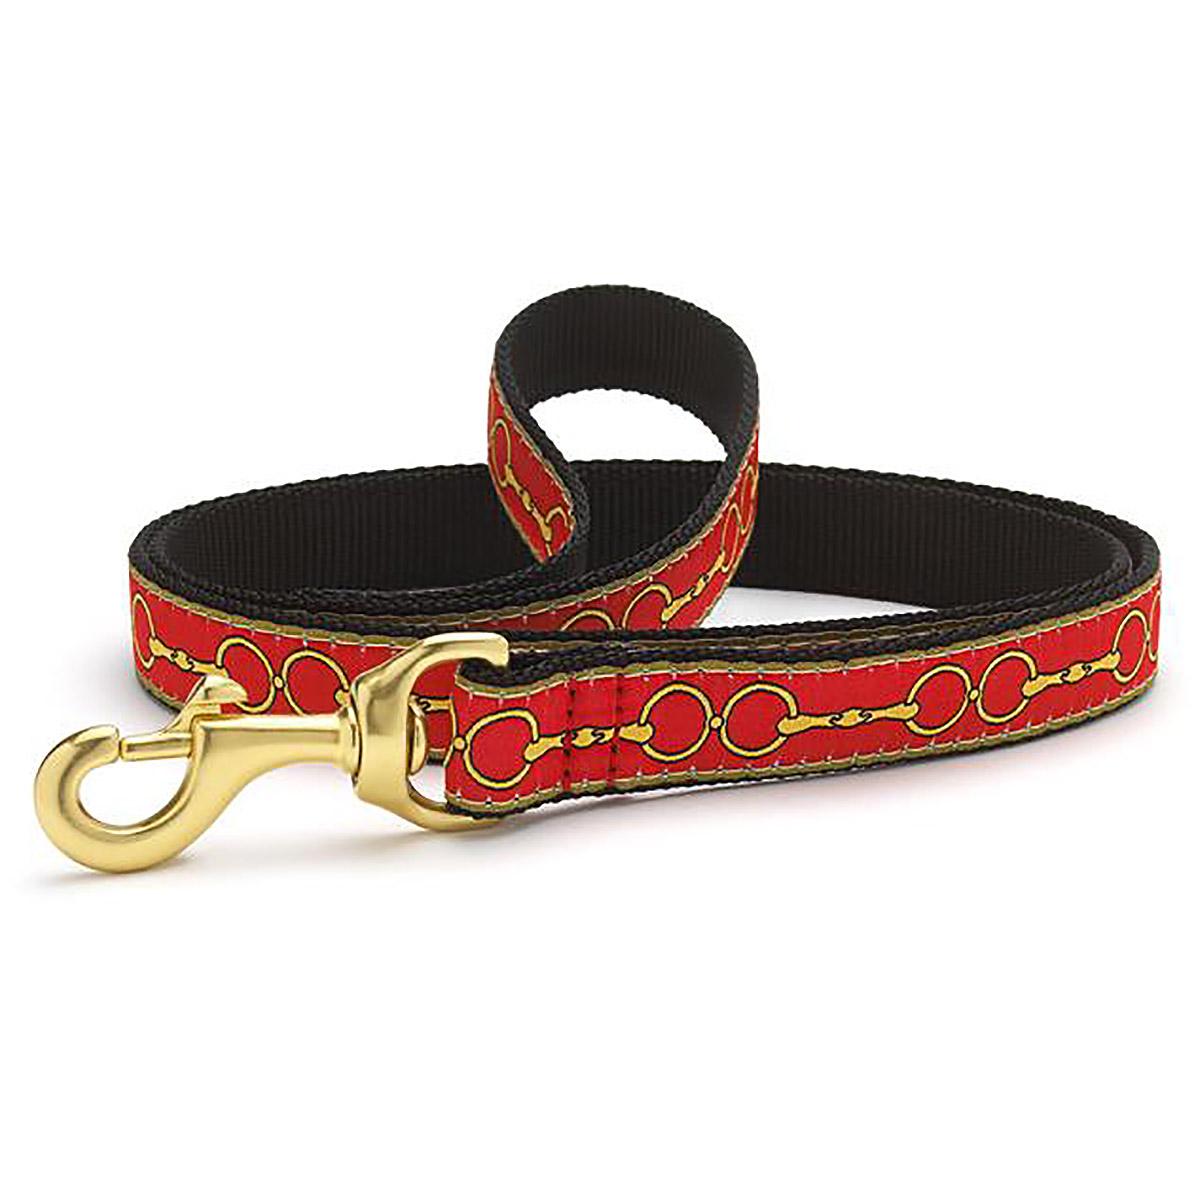 Love You to Bits Dog Leash by Up Country